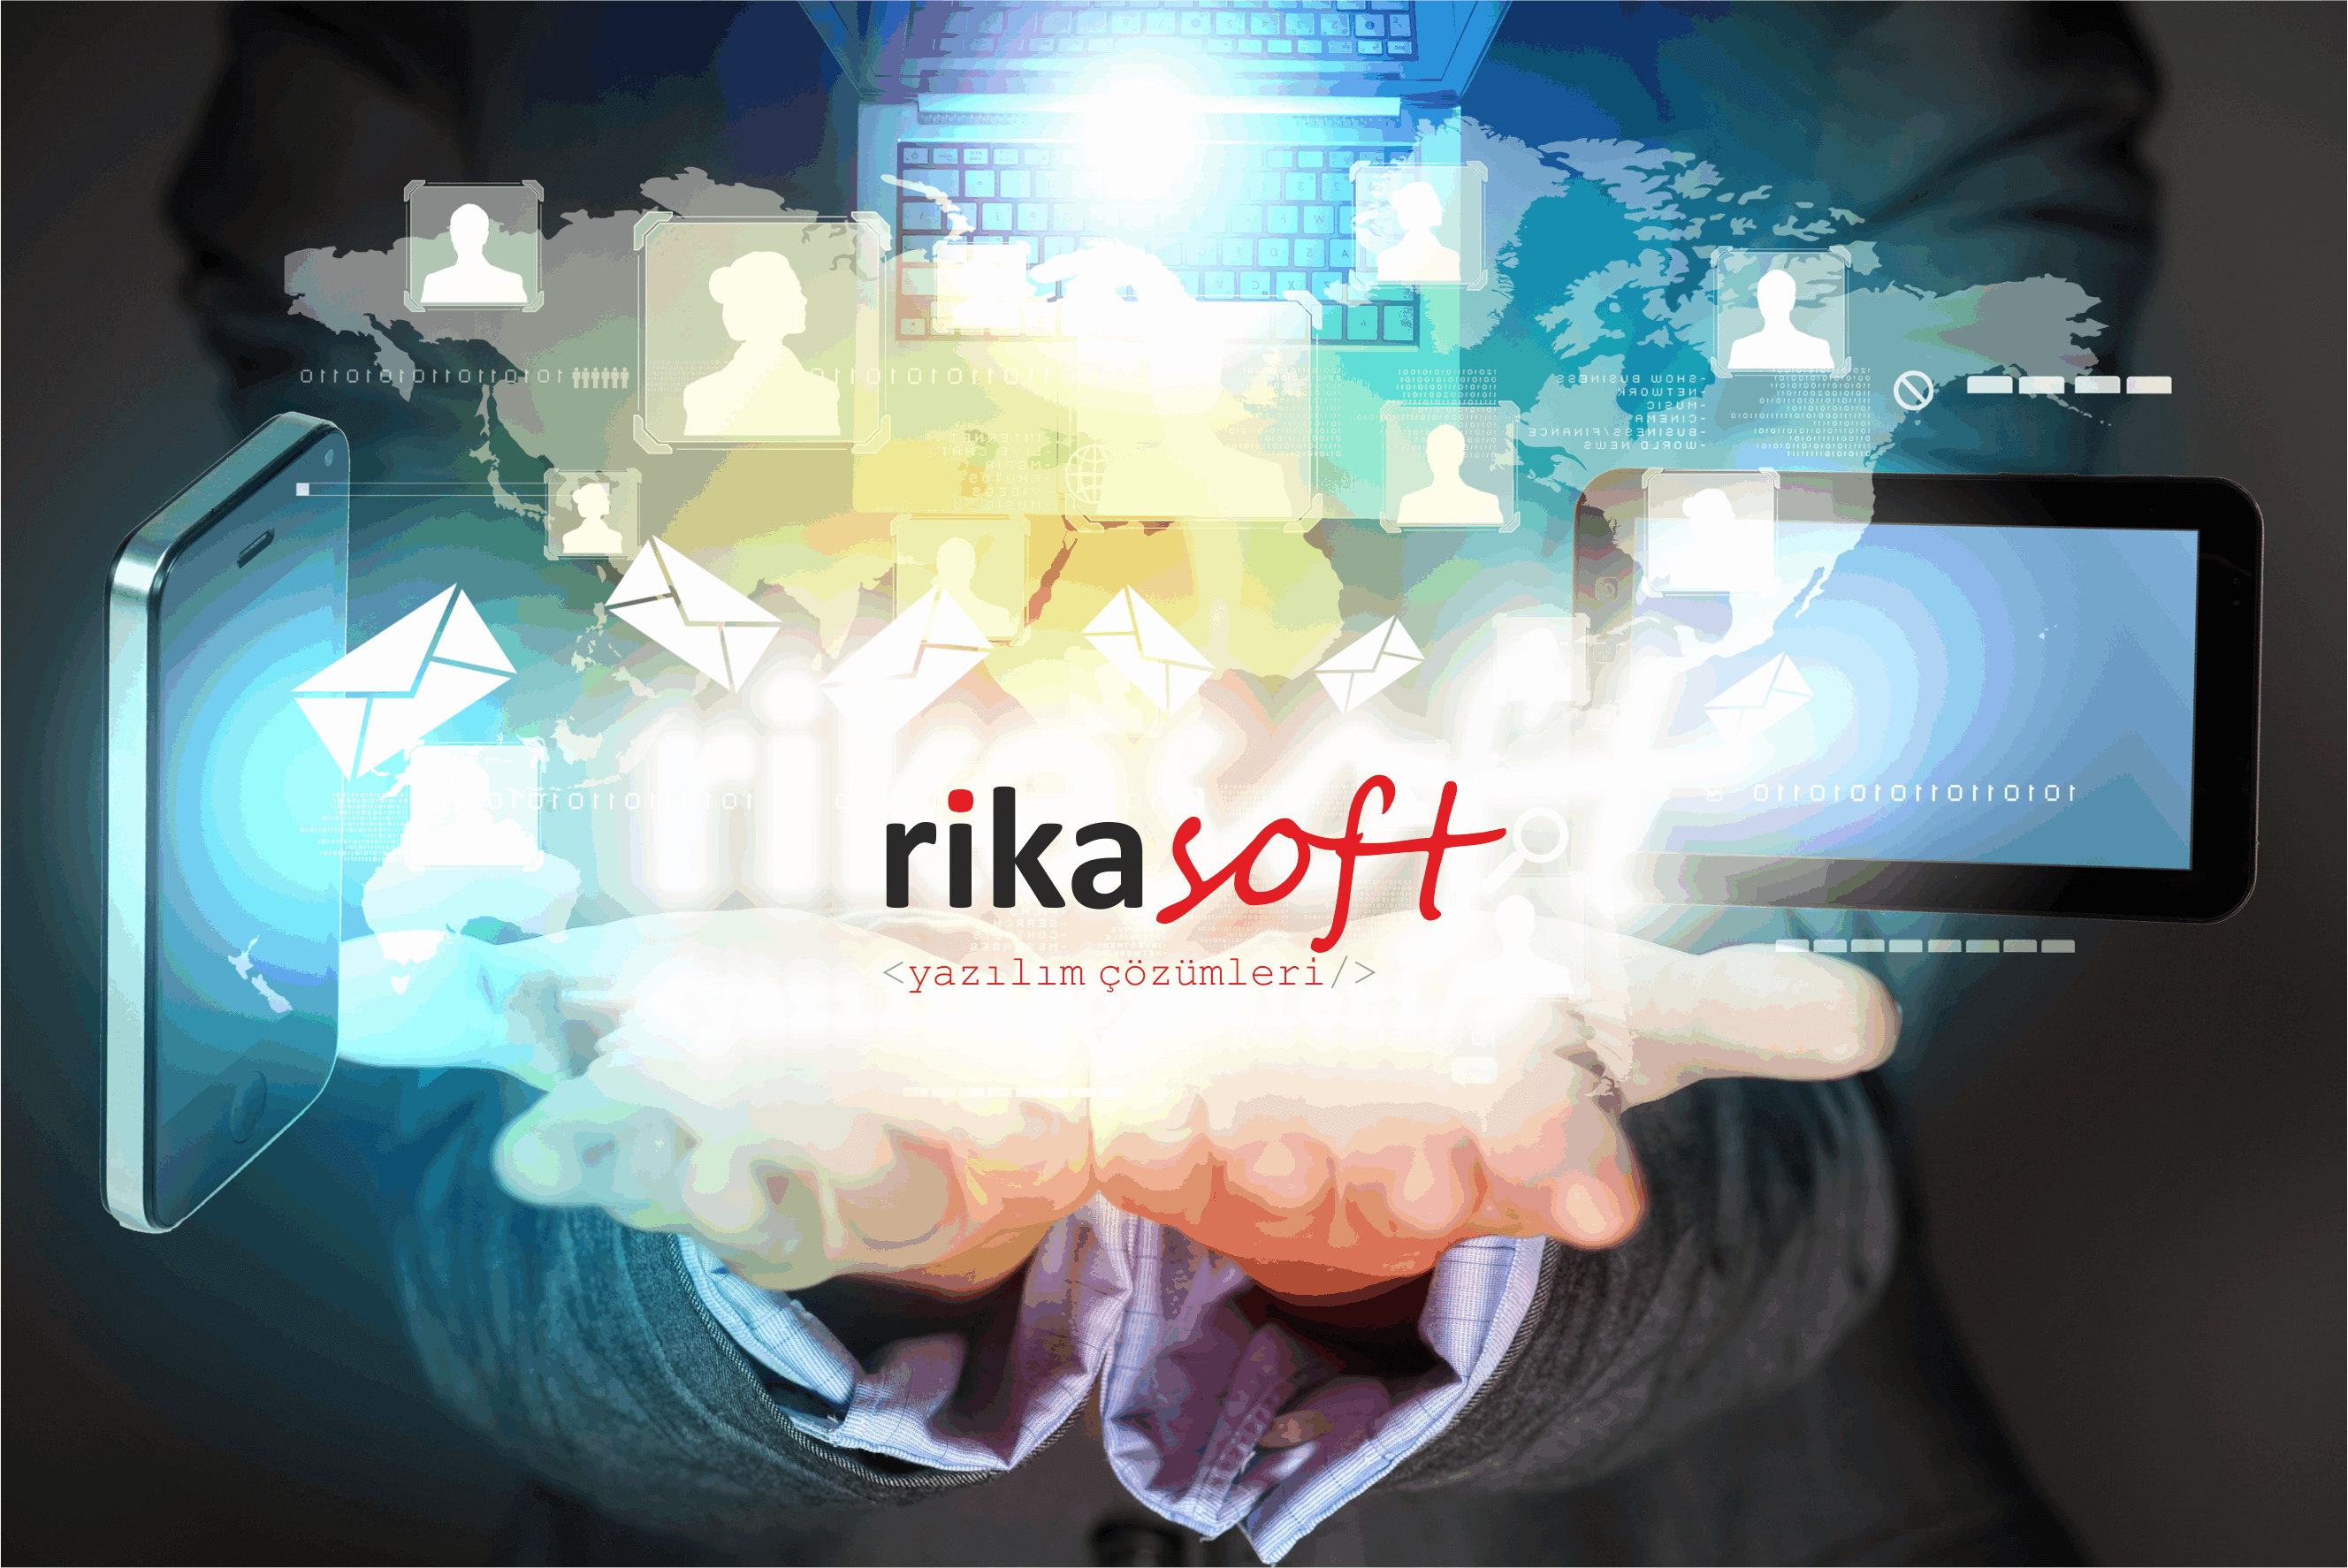 About RikaSoft Software Solutions in Cyprus